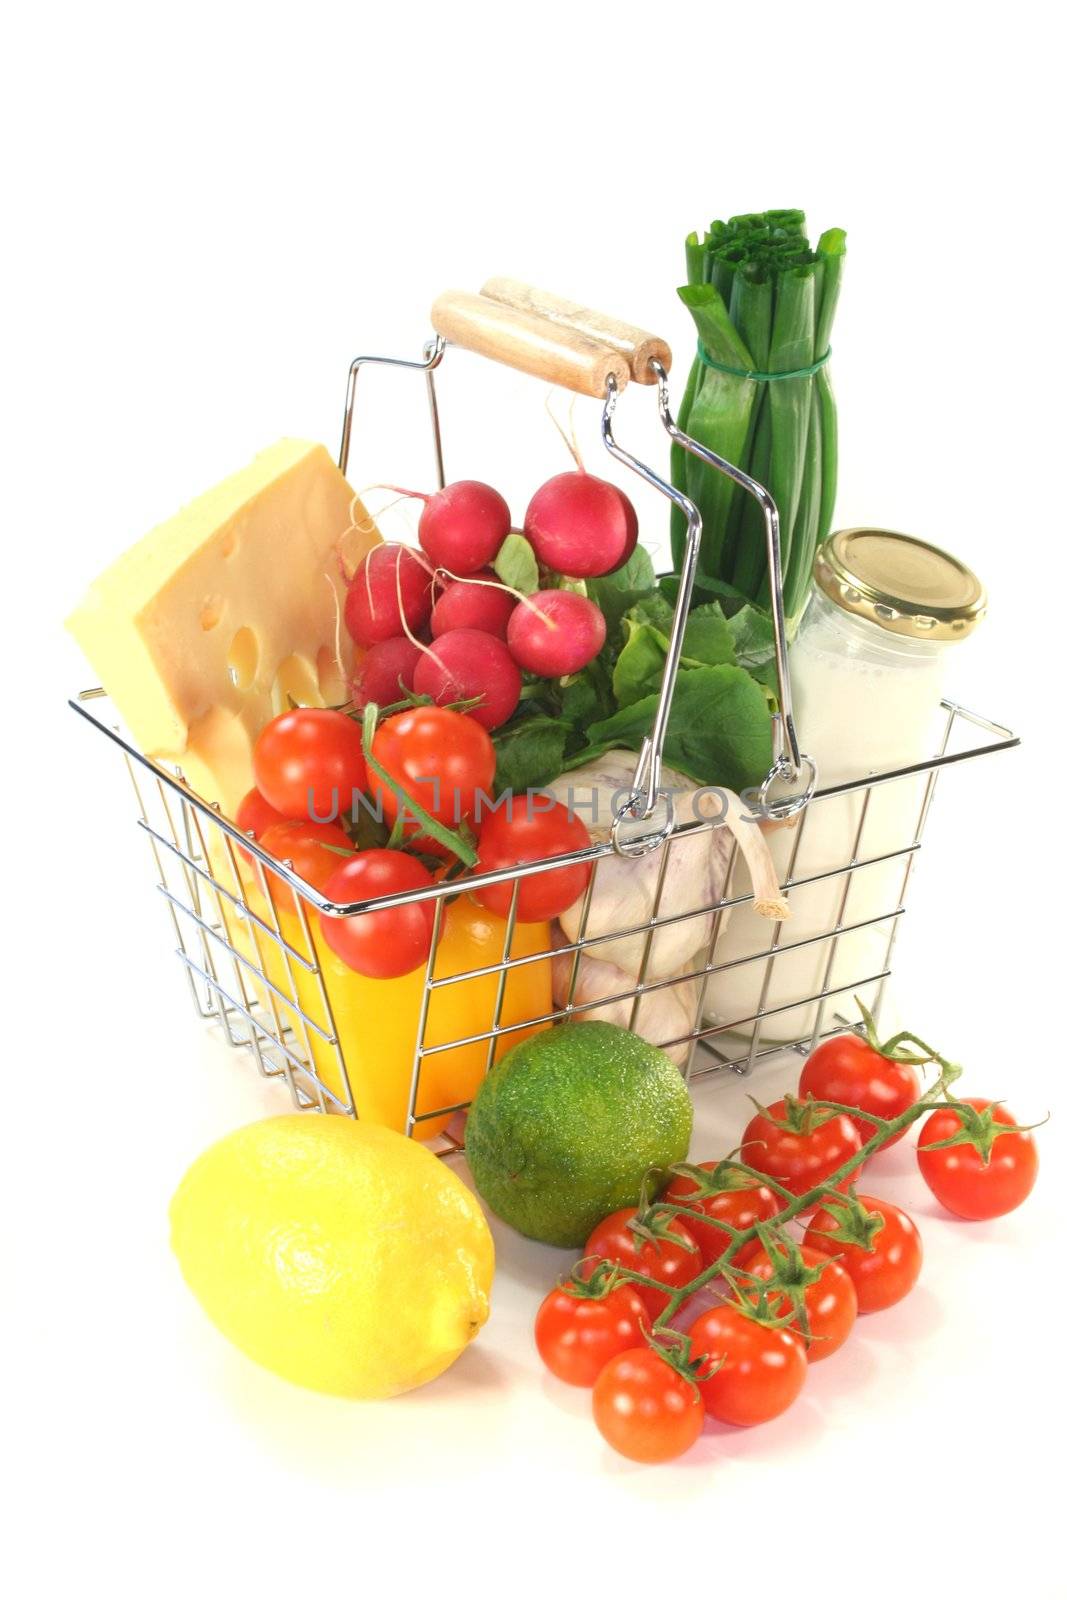 Shopping cart with milk, cheese and mixed vegetables